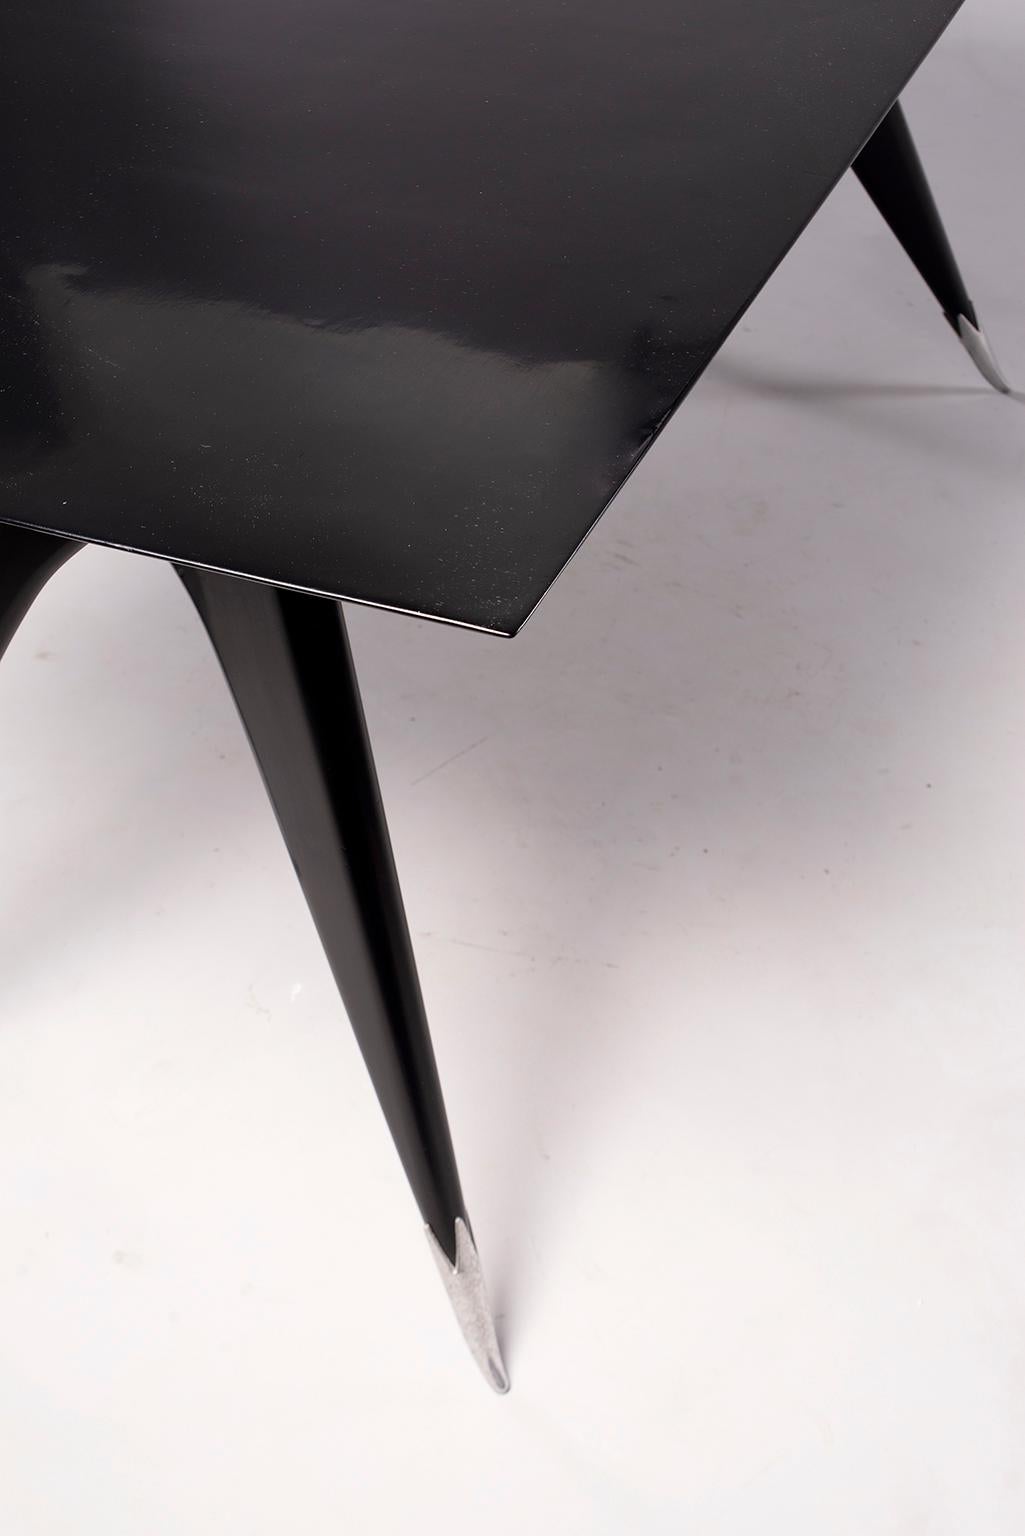 Metal Midcentury Italian Ebonized Dining Table with Tapered Legs and Silver Leg Caps